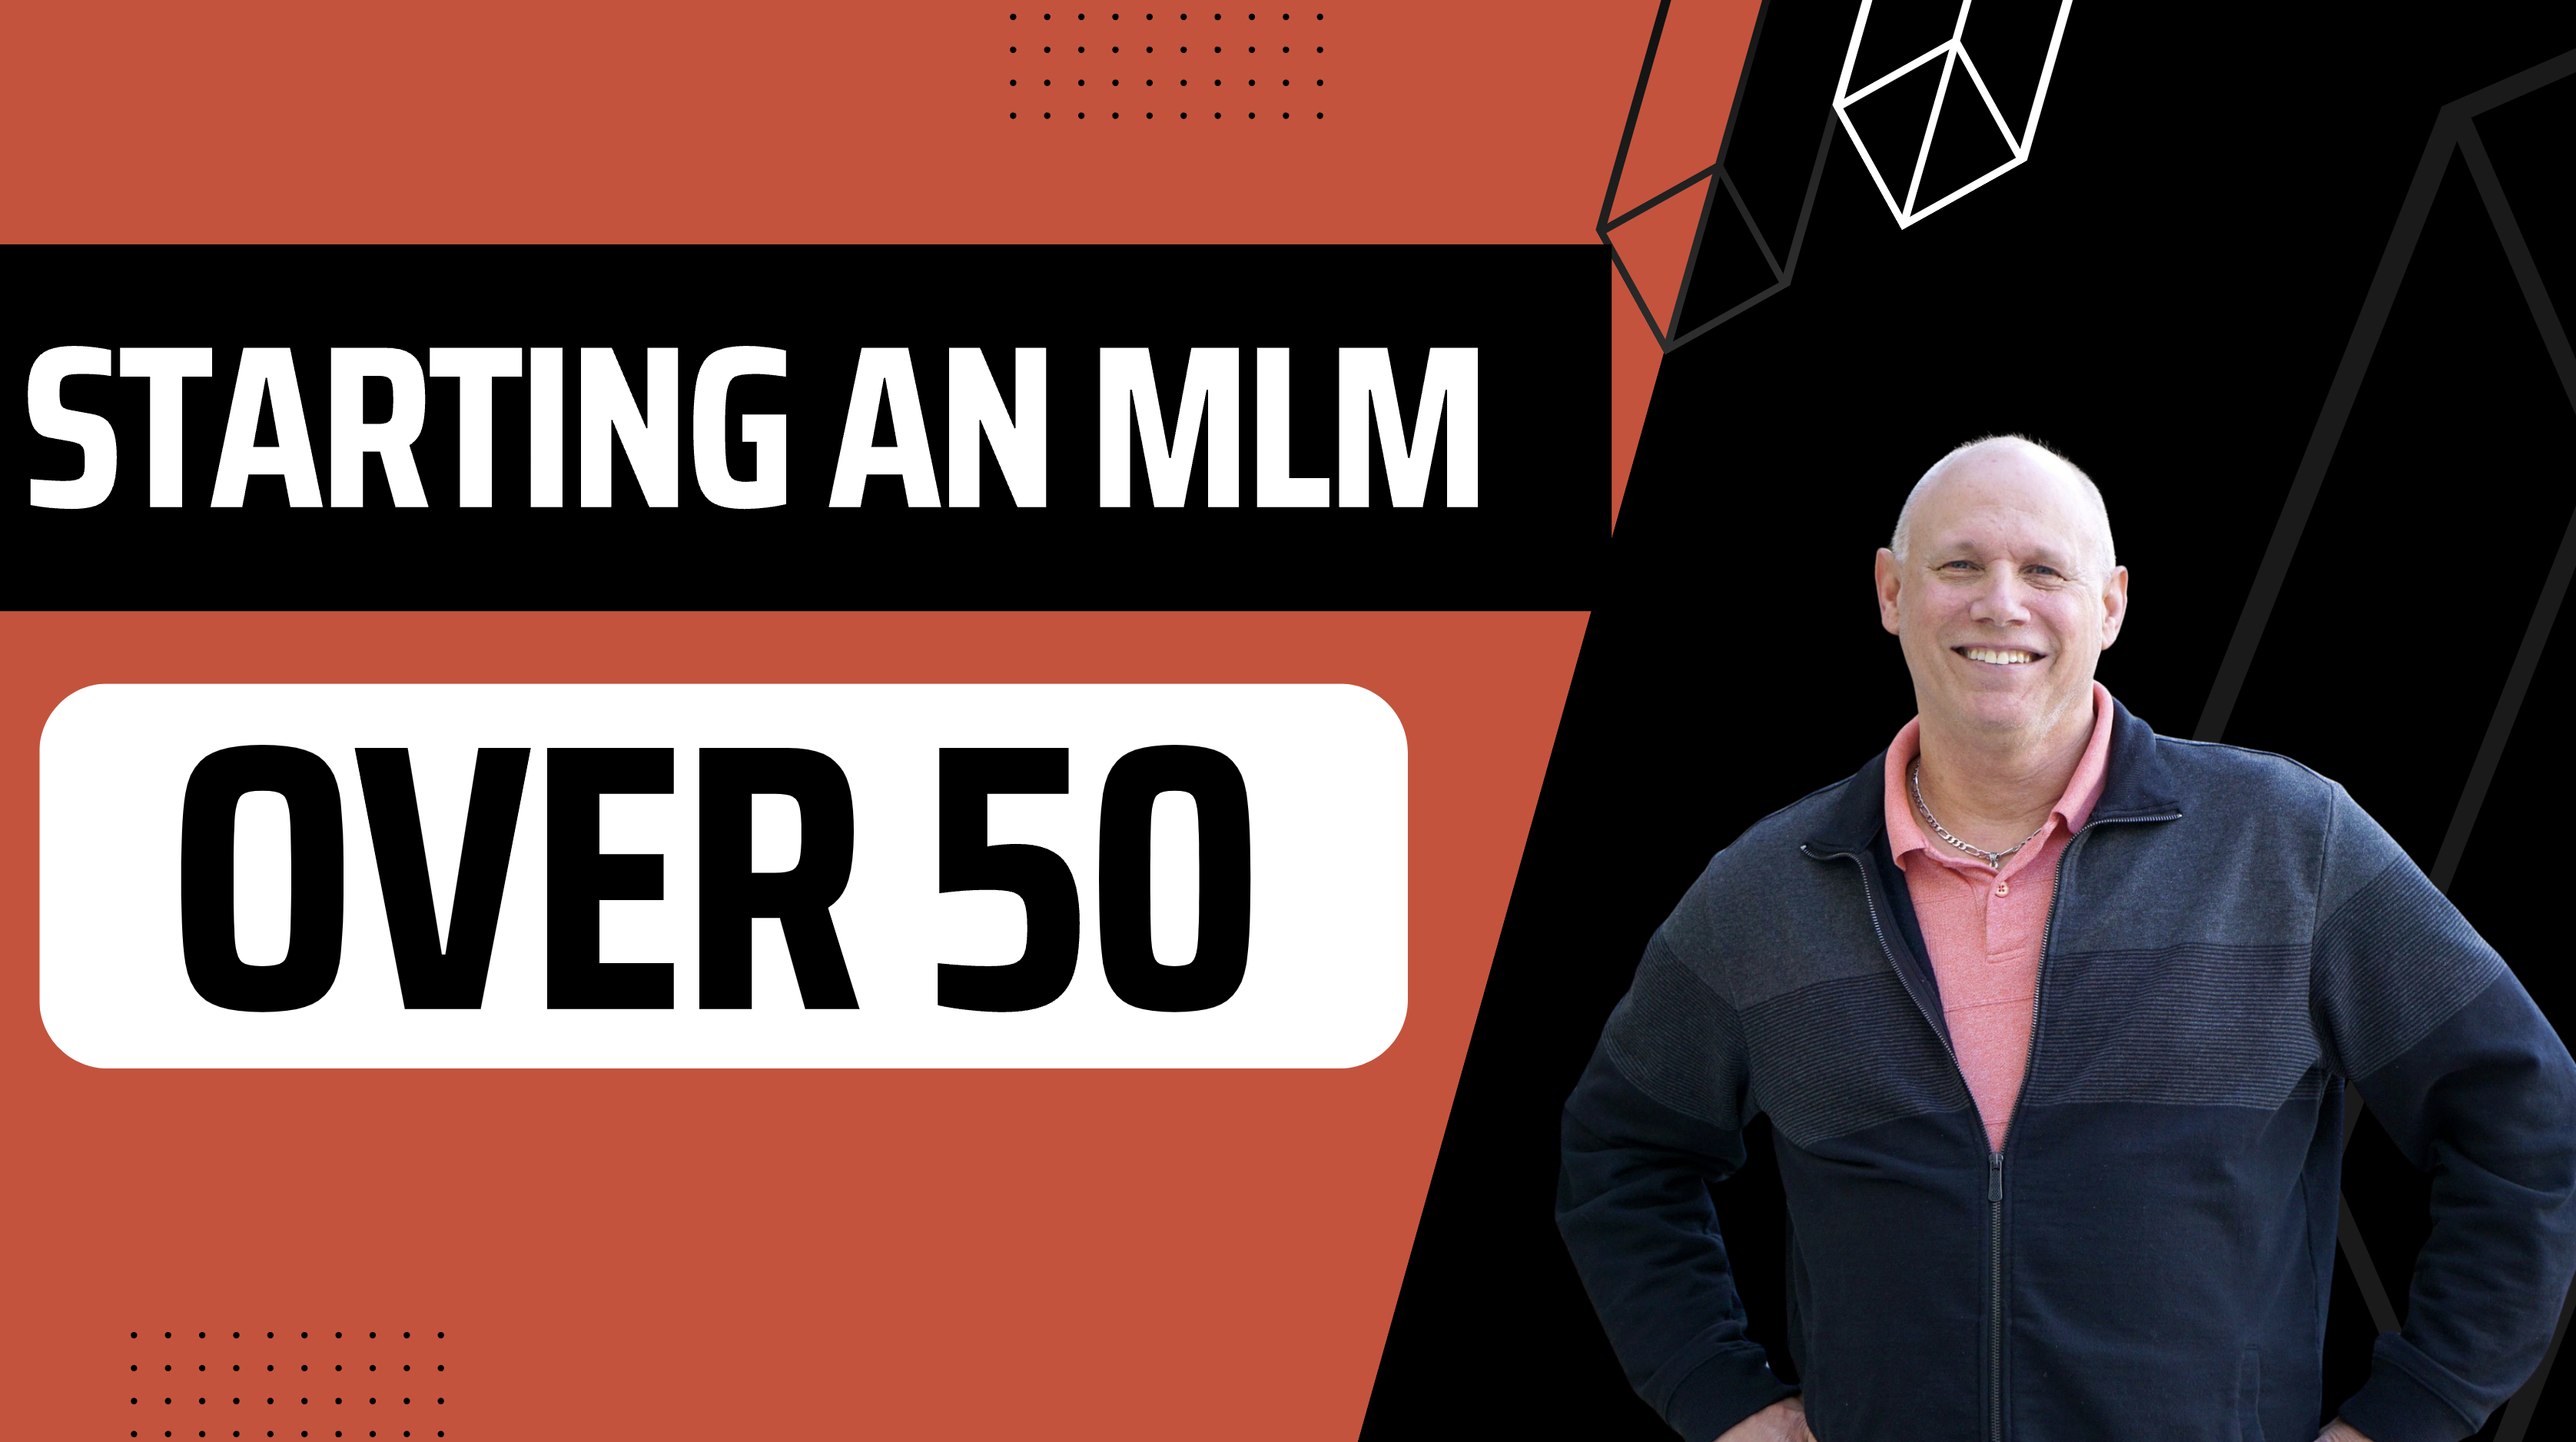 starting an mlm business over 50